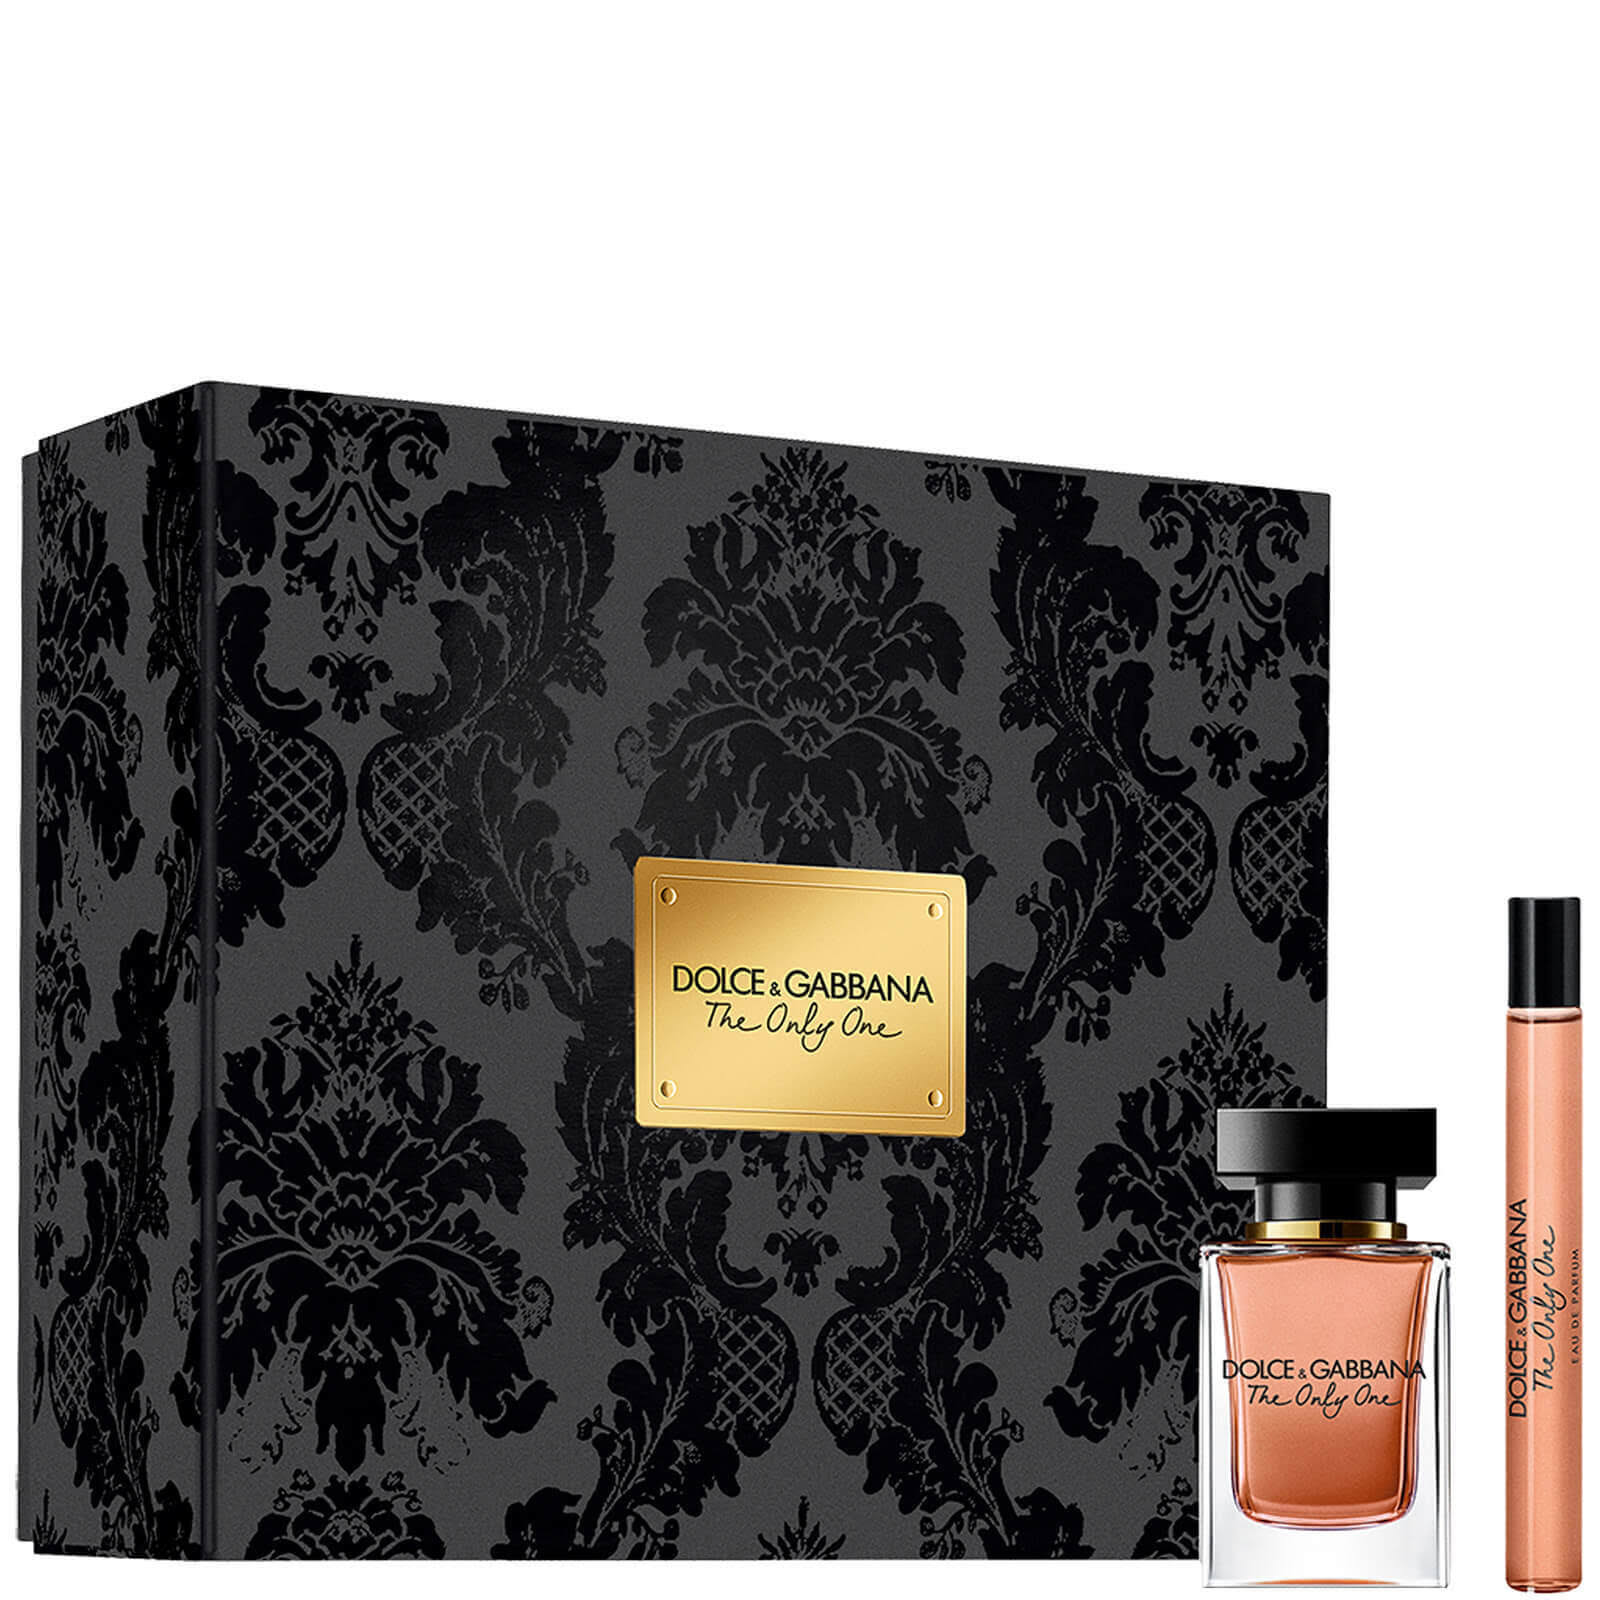 Dolce & Gabbana The Only One Gift Set 50ml 2020